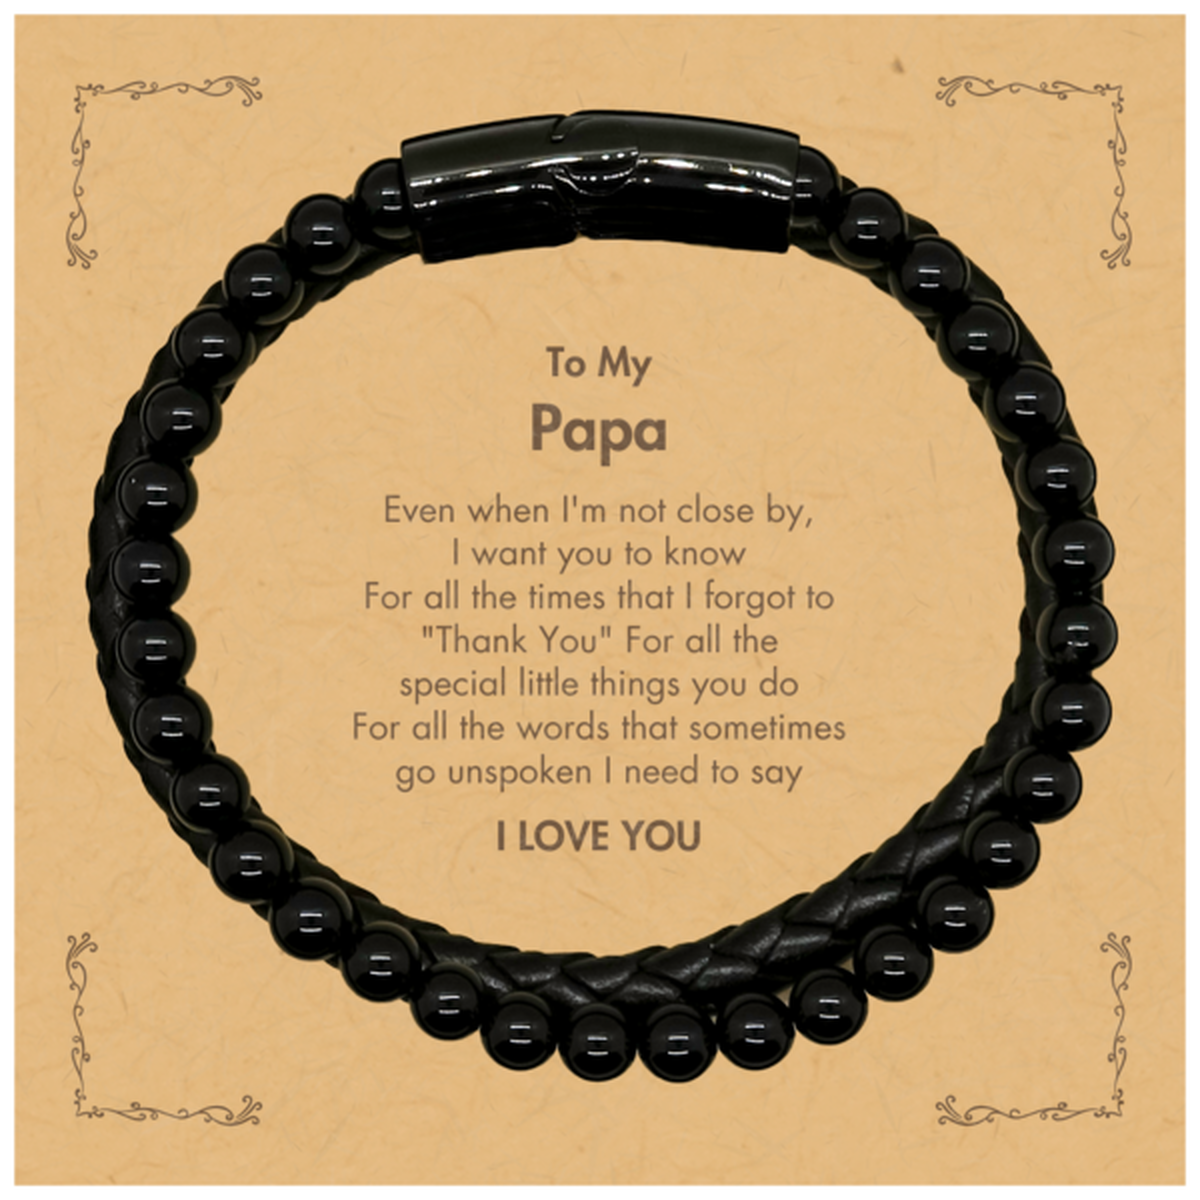 Thank You Gifts for Papa, Keepsake Stone Leather Bracelets Gifts for Papa Birthday Mother's day Father's Day Papa For all the words That sometimes go unspoken I need to say I LOVE YOU